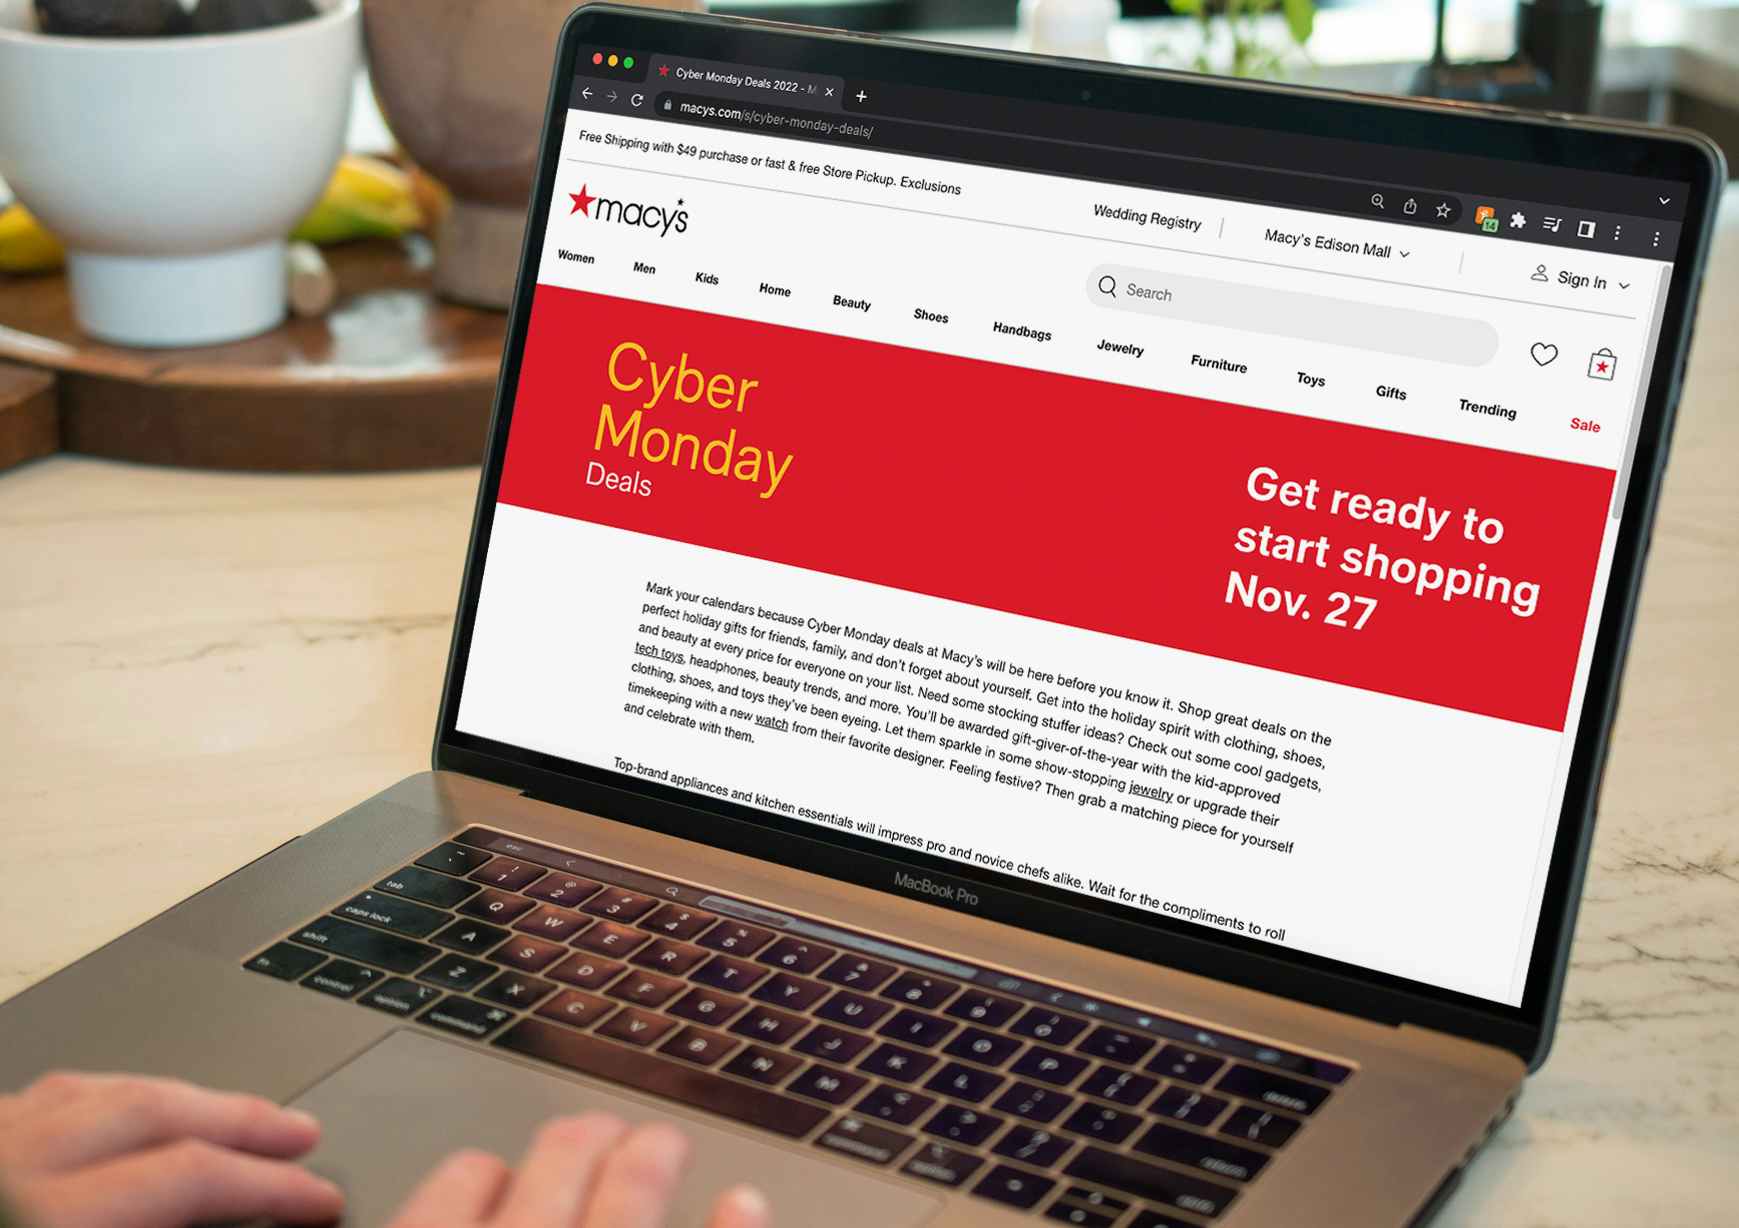 A person using a laptop displaying the Macy's website page for Cyber Monday deals.